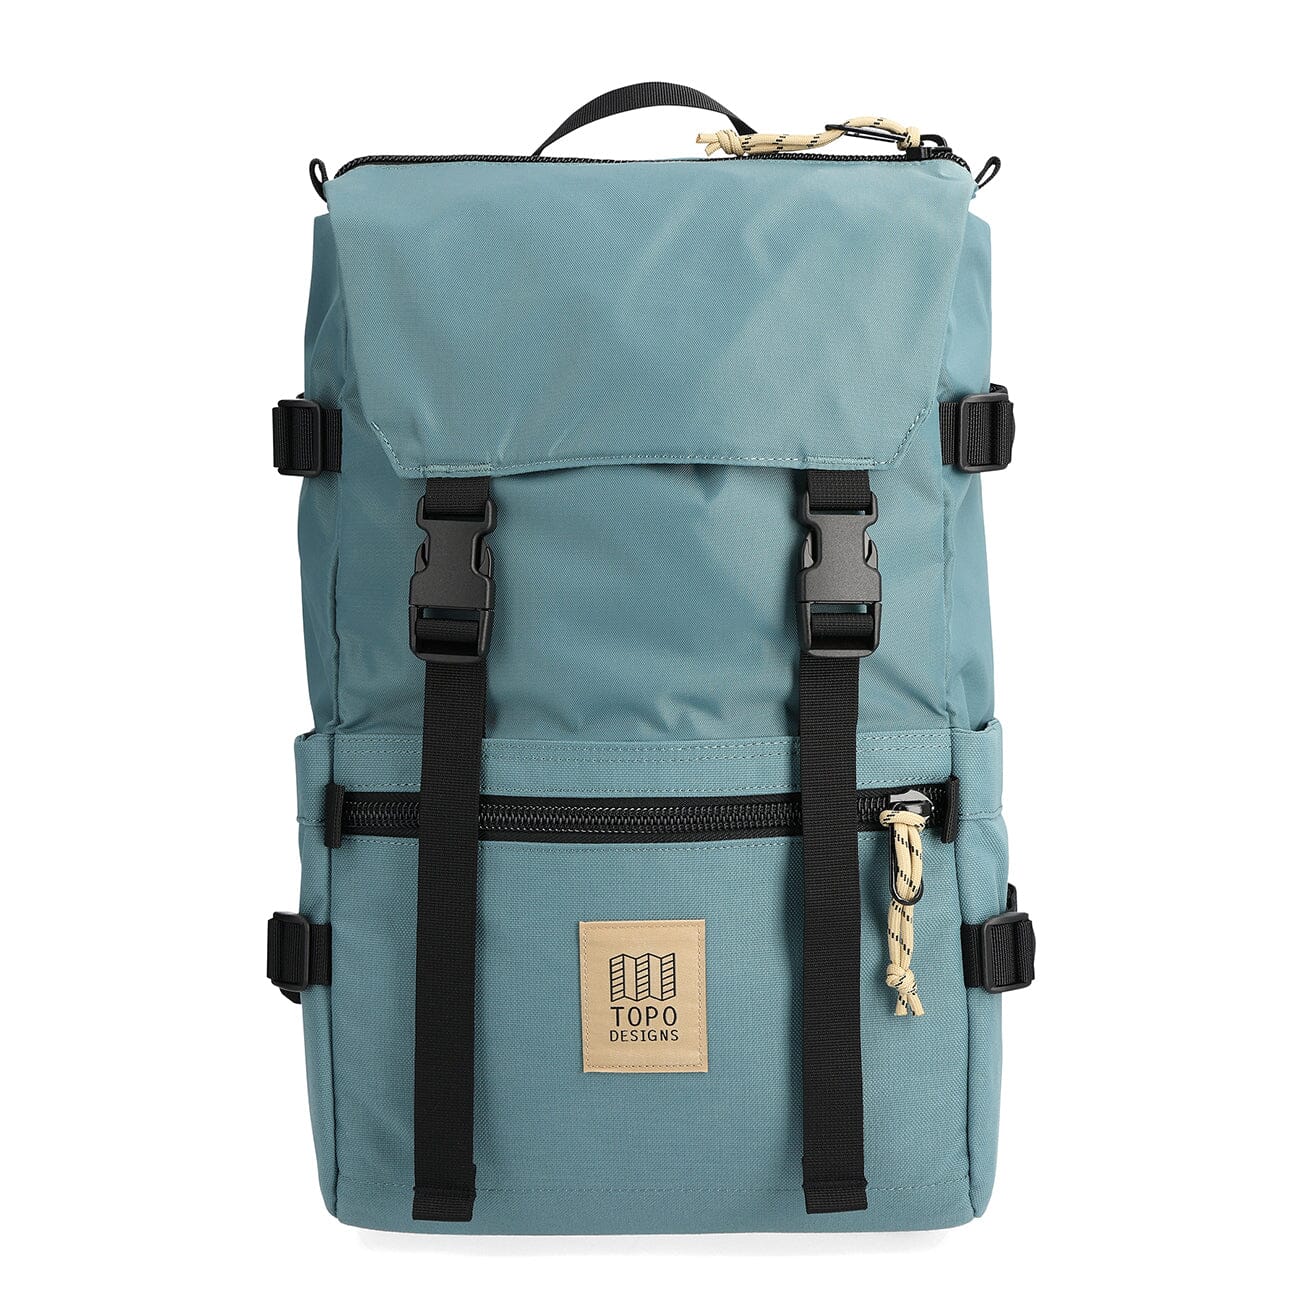 sea pine light blue recycled nylon backpack rover pack classic front